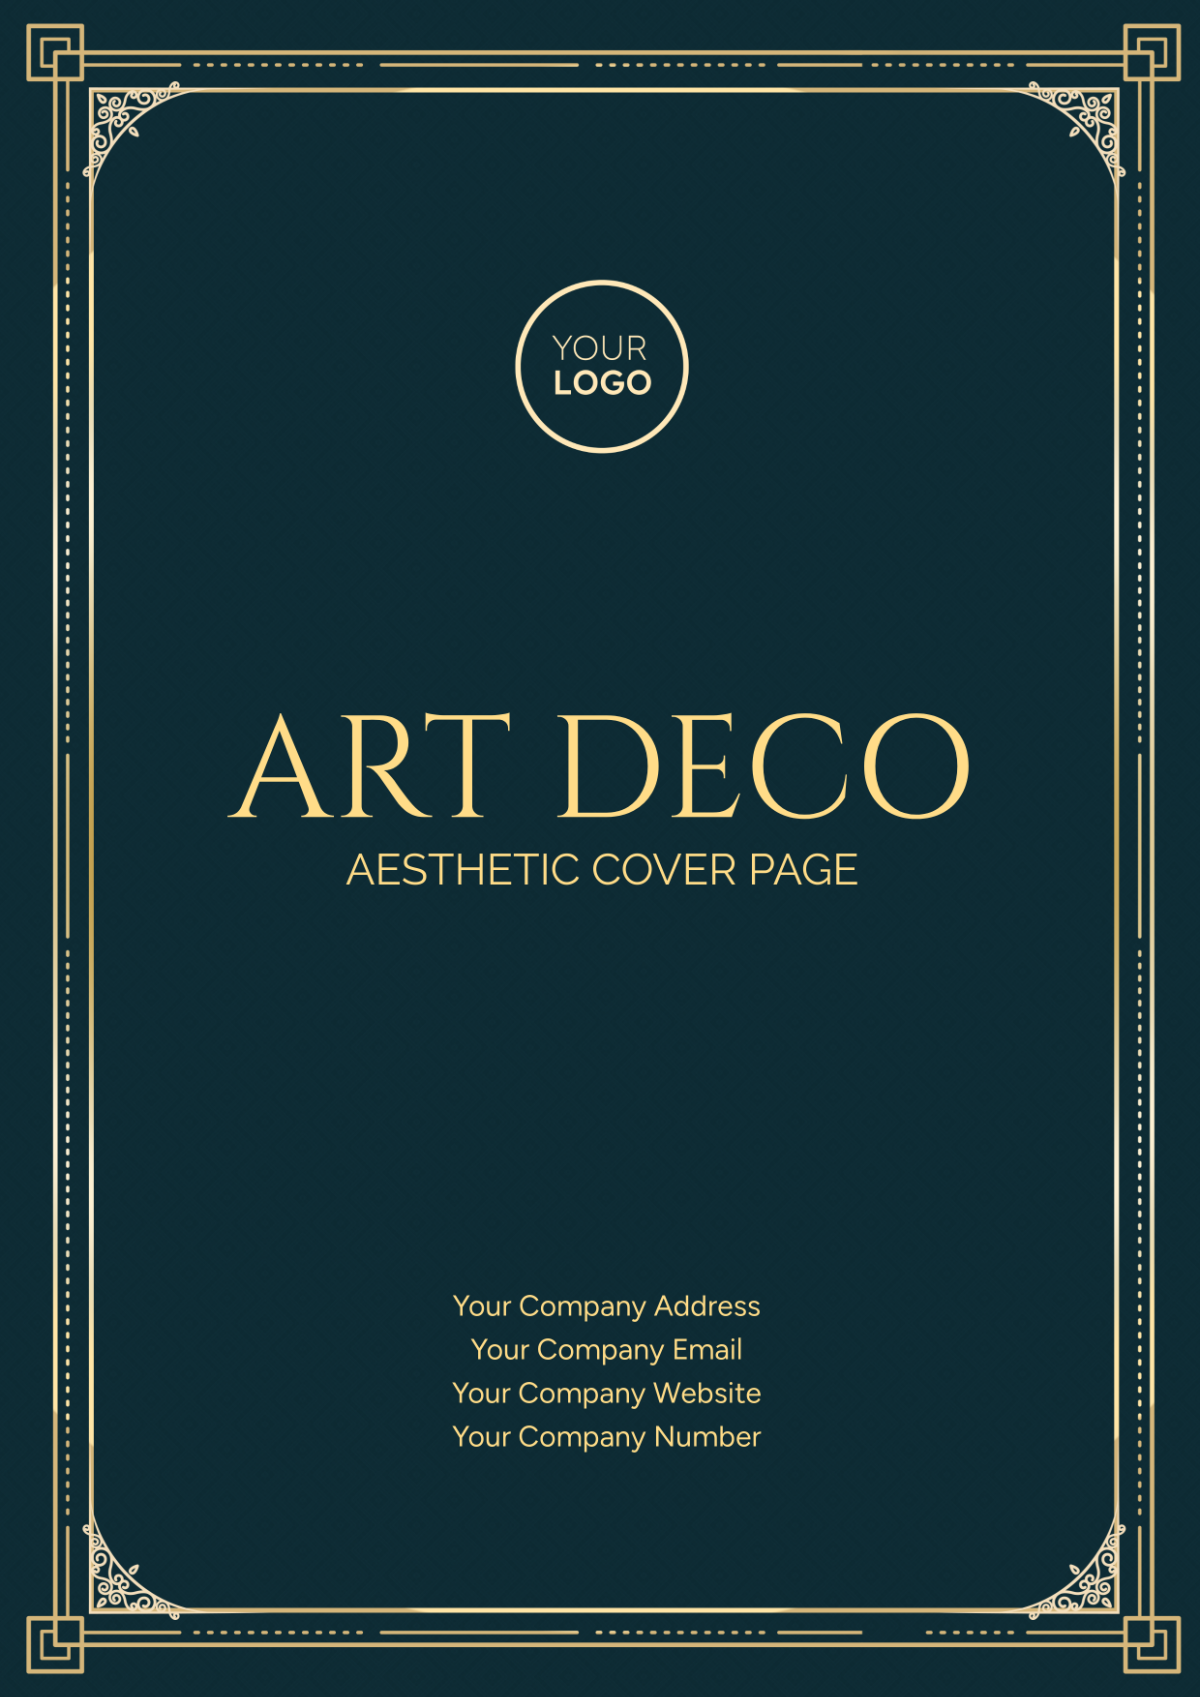 Art Deco Aesthetic Cover Page